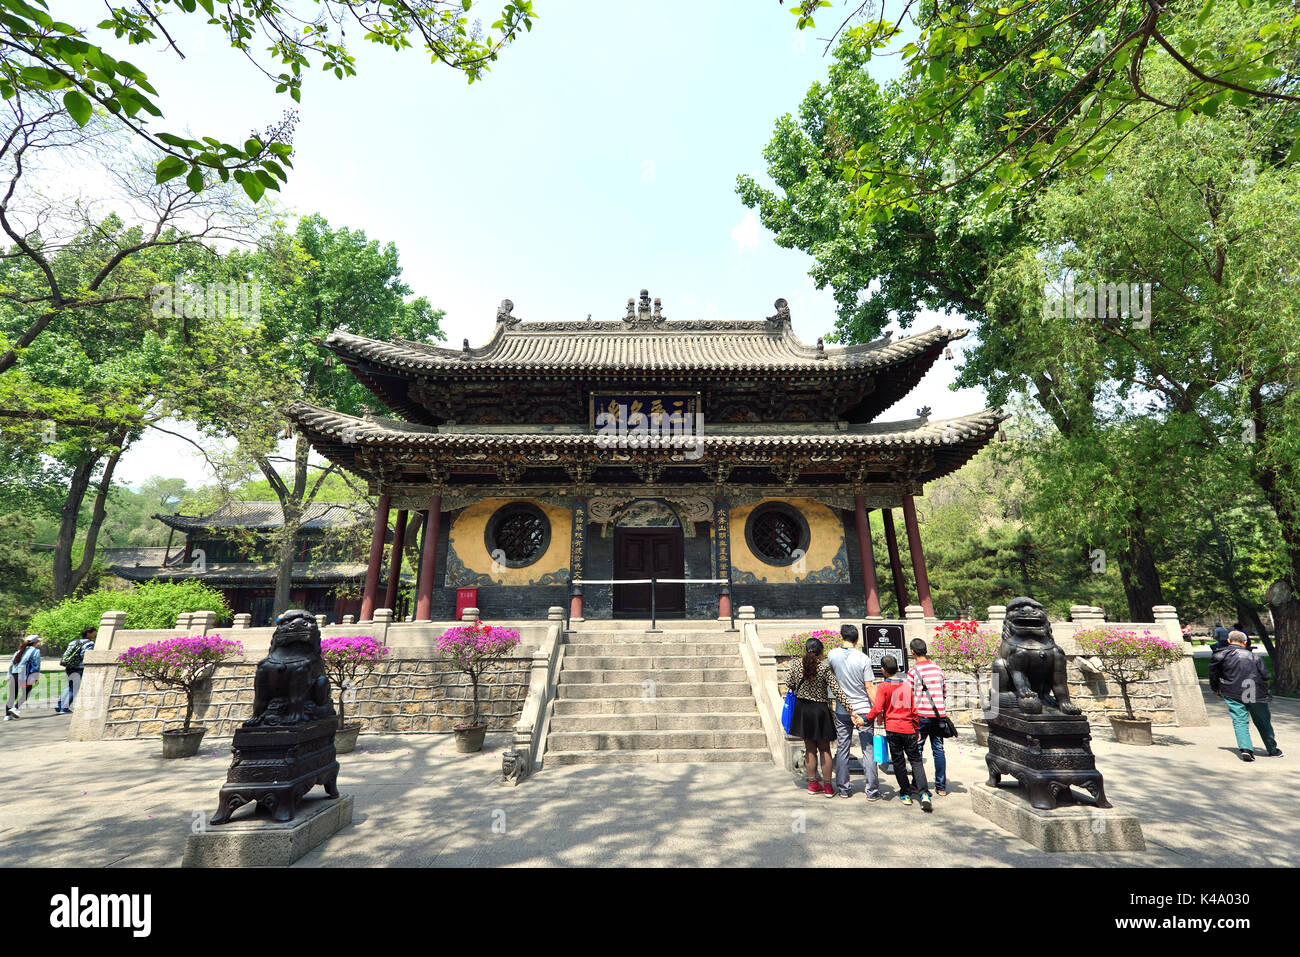 Taiyuan,China - Apr 30,2016:Classical Chinese ancientry building-The mirror terrace of Jinci museum in Taiyuan, Shanxi, China. Stock Photo